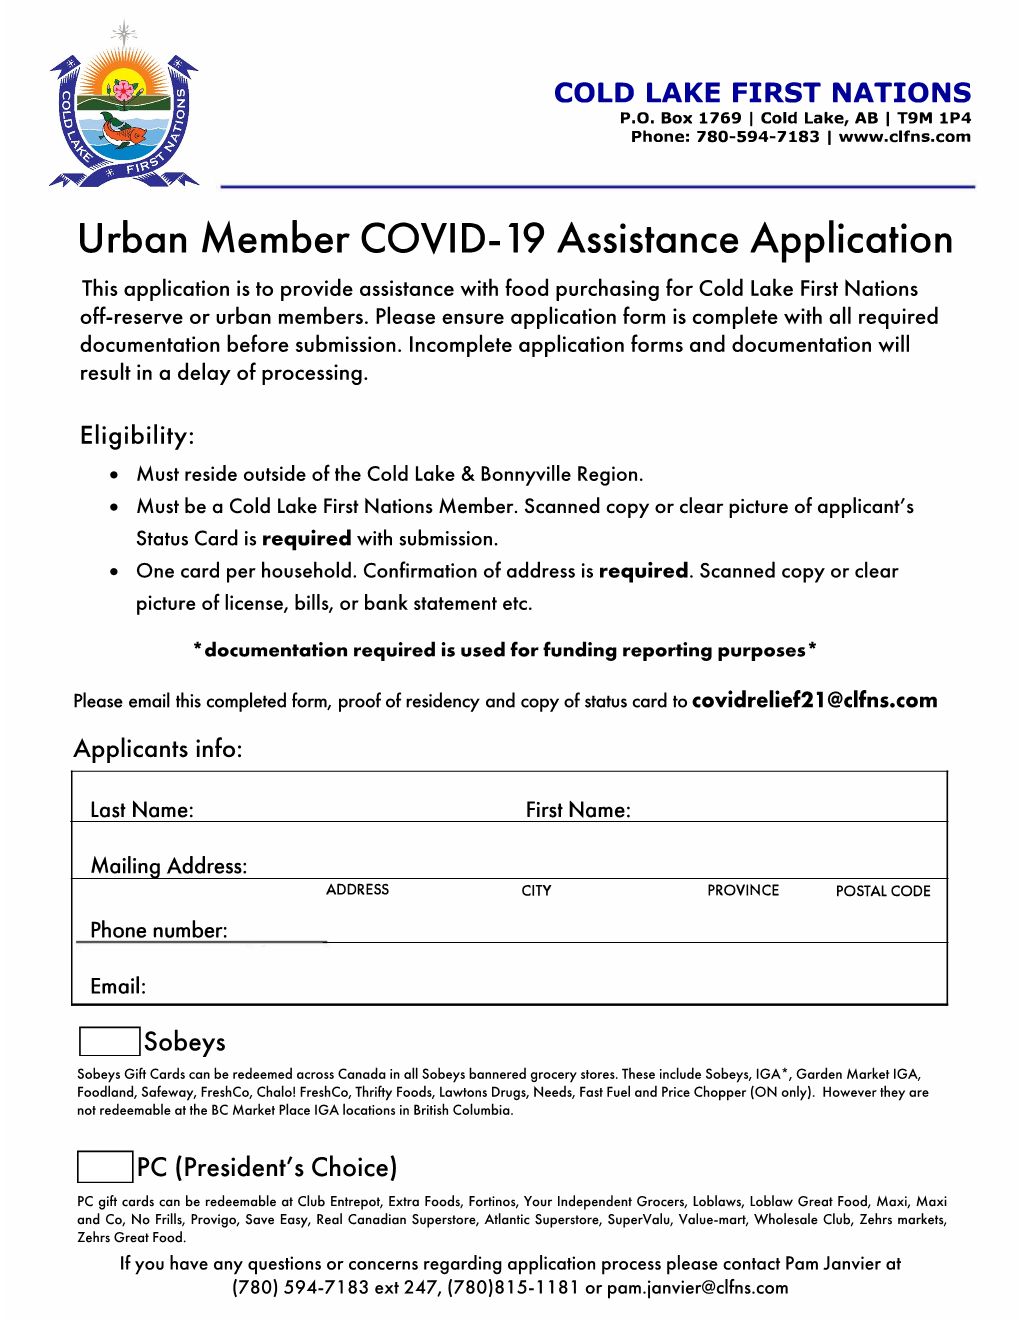 Completed Form, Proof of Residency and Copy of Status Card to Covidrelief21@Clfns.Com Applicants Info